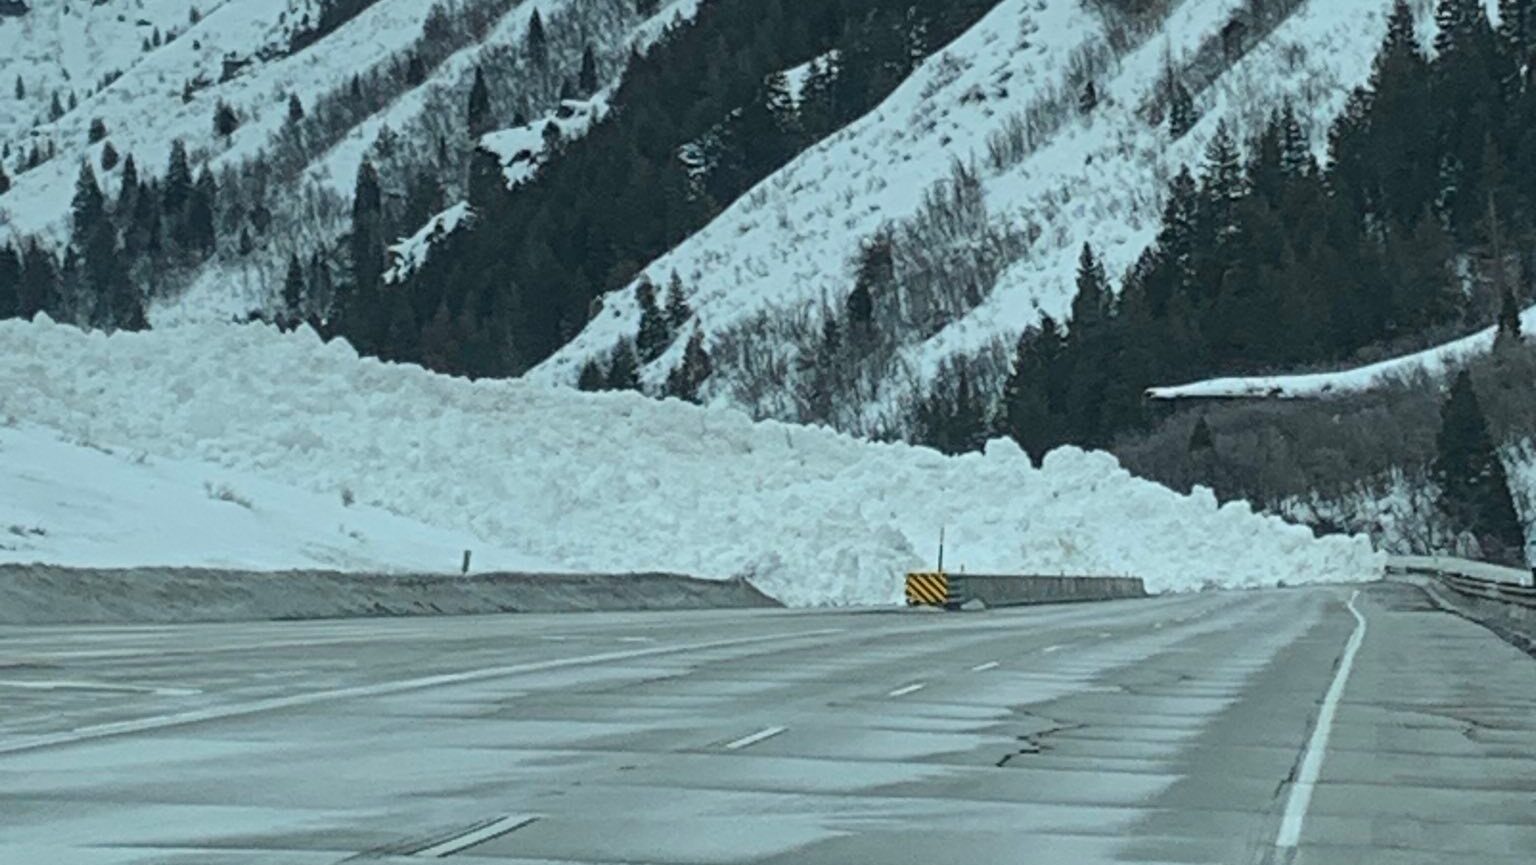 An avalanche up Provo Canyon has closed US-189 near milepost 12. The Utah Department of transportat...